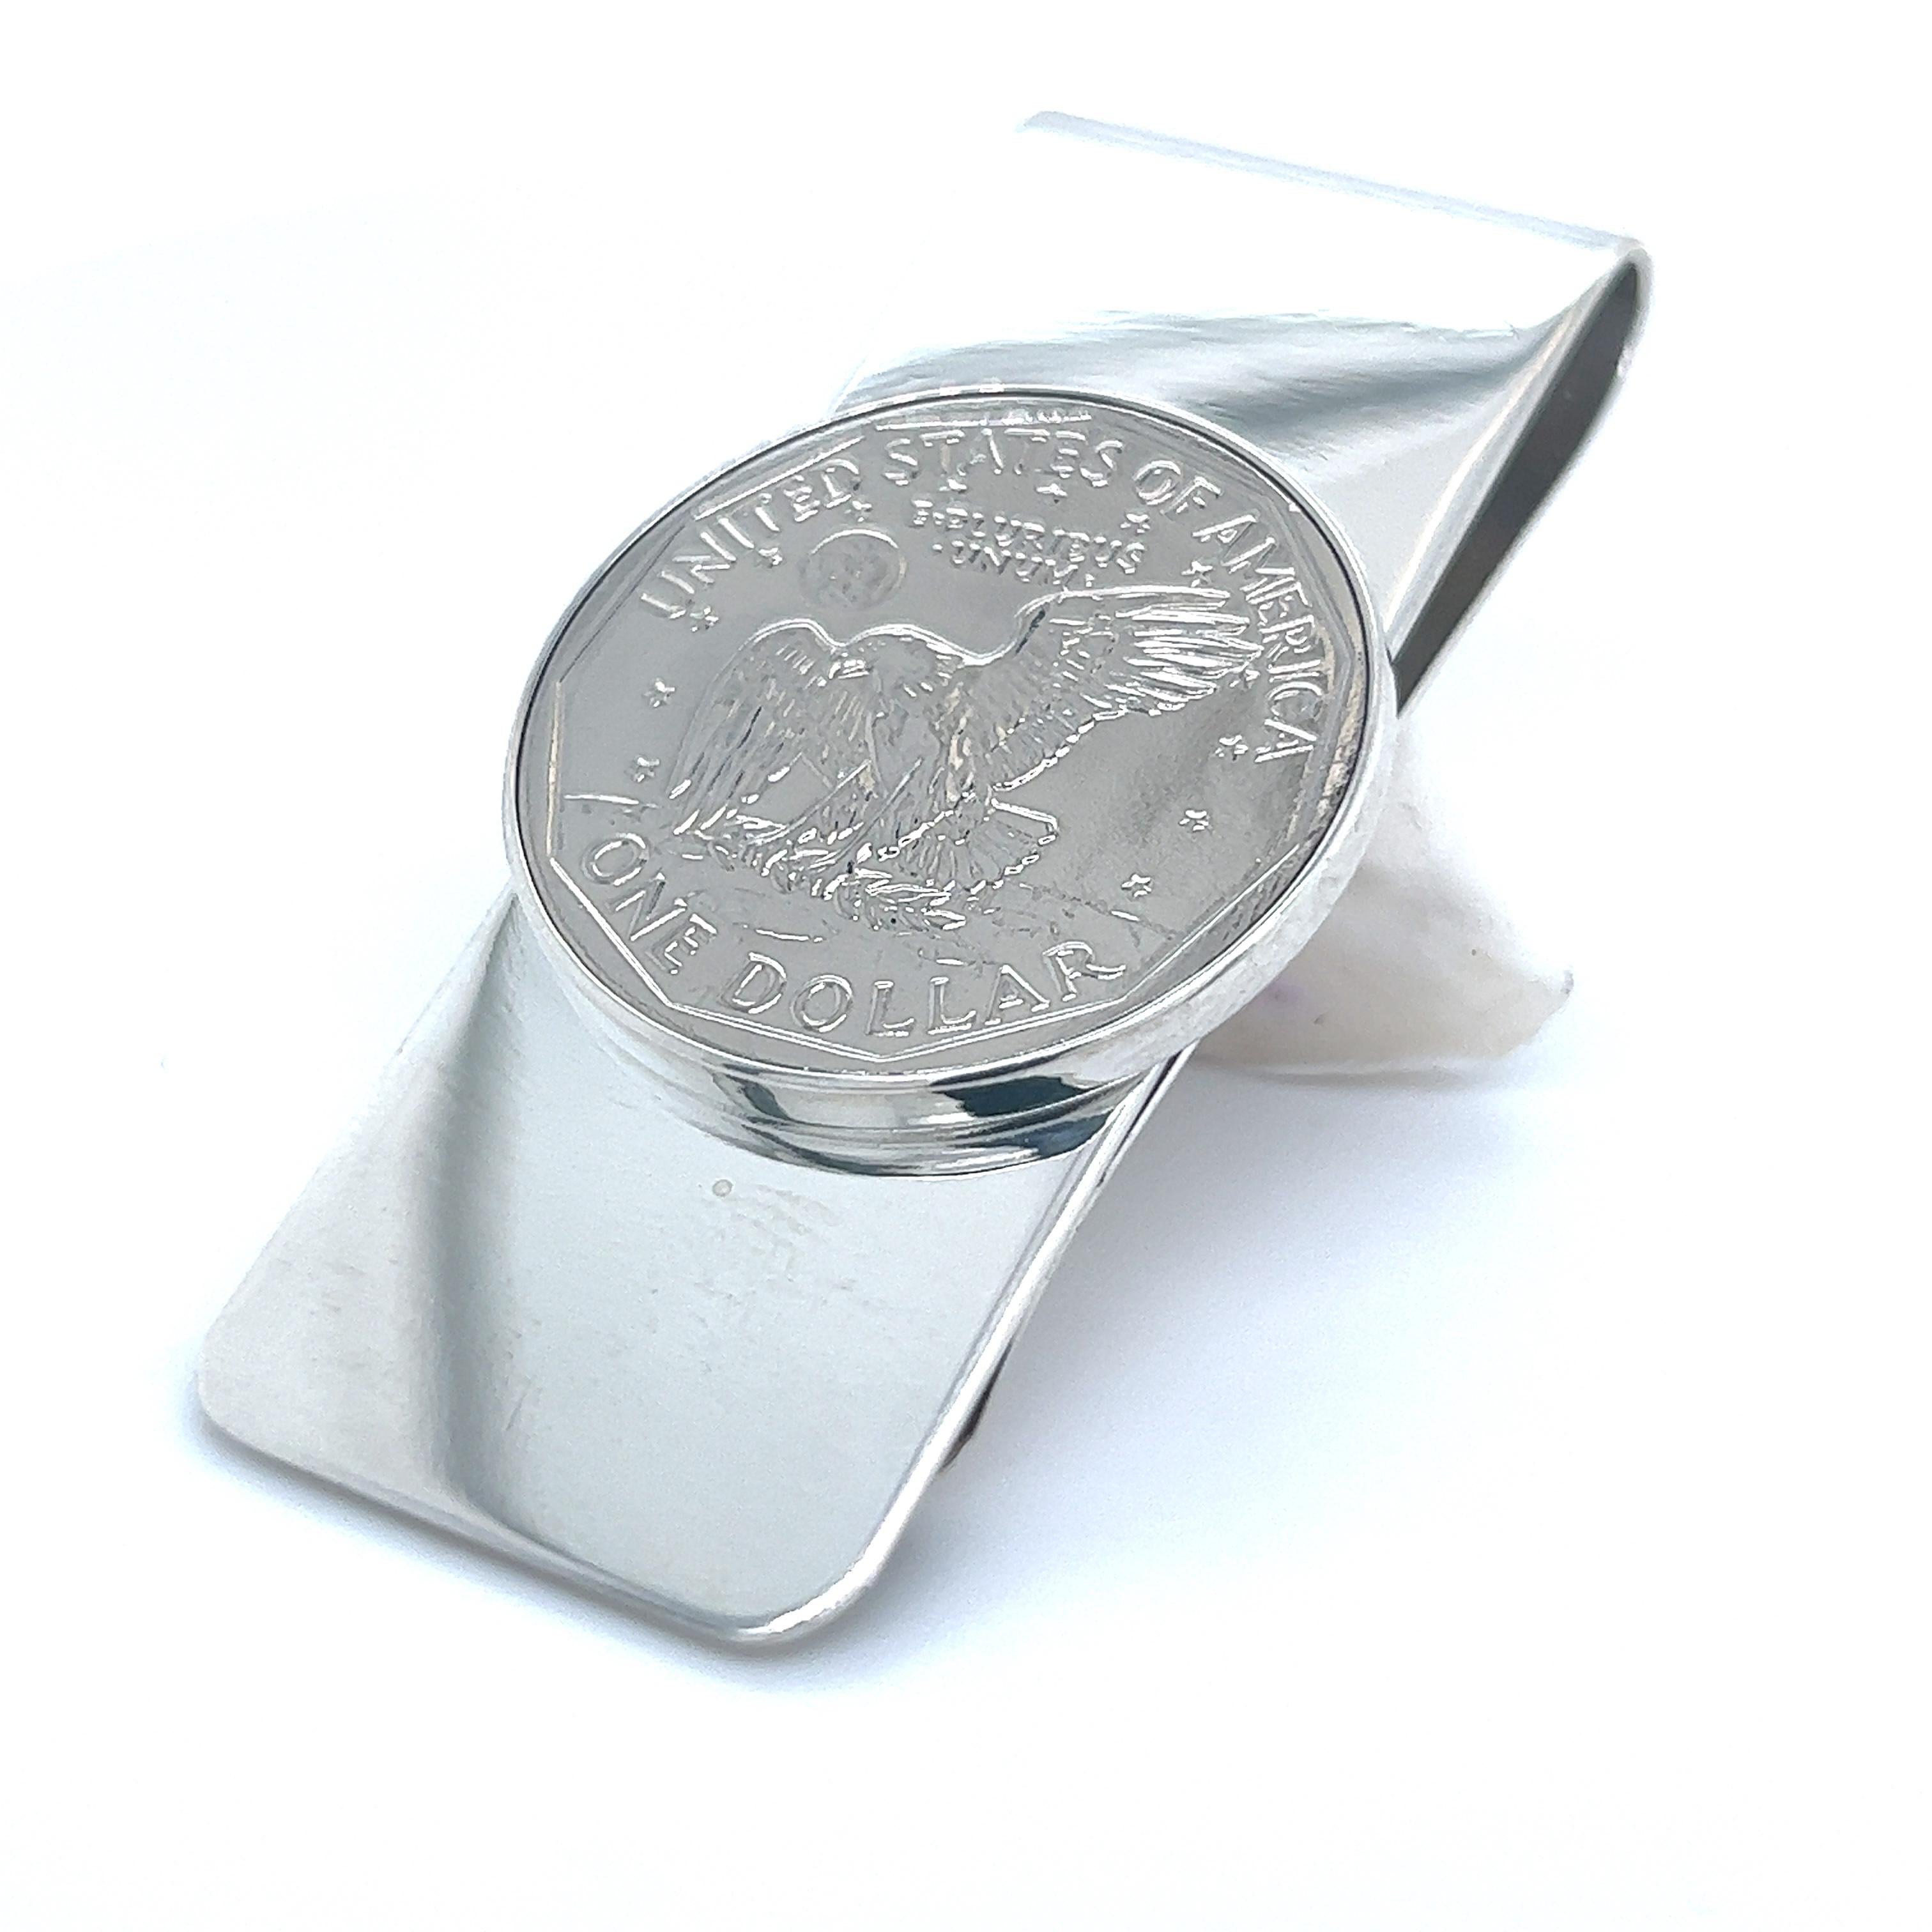 Tiffany & Co Estate One Dollar Coin Money Clip Silver TIF442

TRUSTED SELLER SINCE 2002

PLEASE SEE OUR HUNDREDS OF POSITIVE FEEDBACKS FROM OUR CLIENTS!!

FREE SHIPPING

This elegant Authentic Tiffany & Co. Men's sterling silver money clip has a